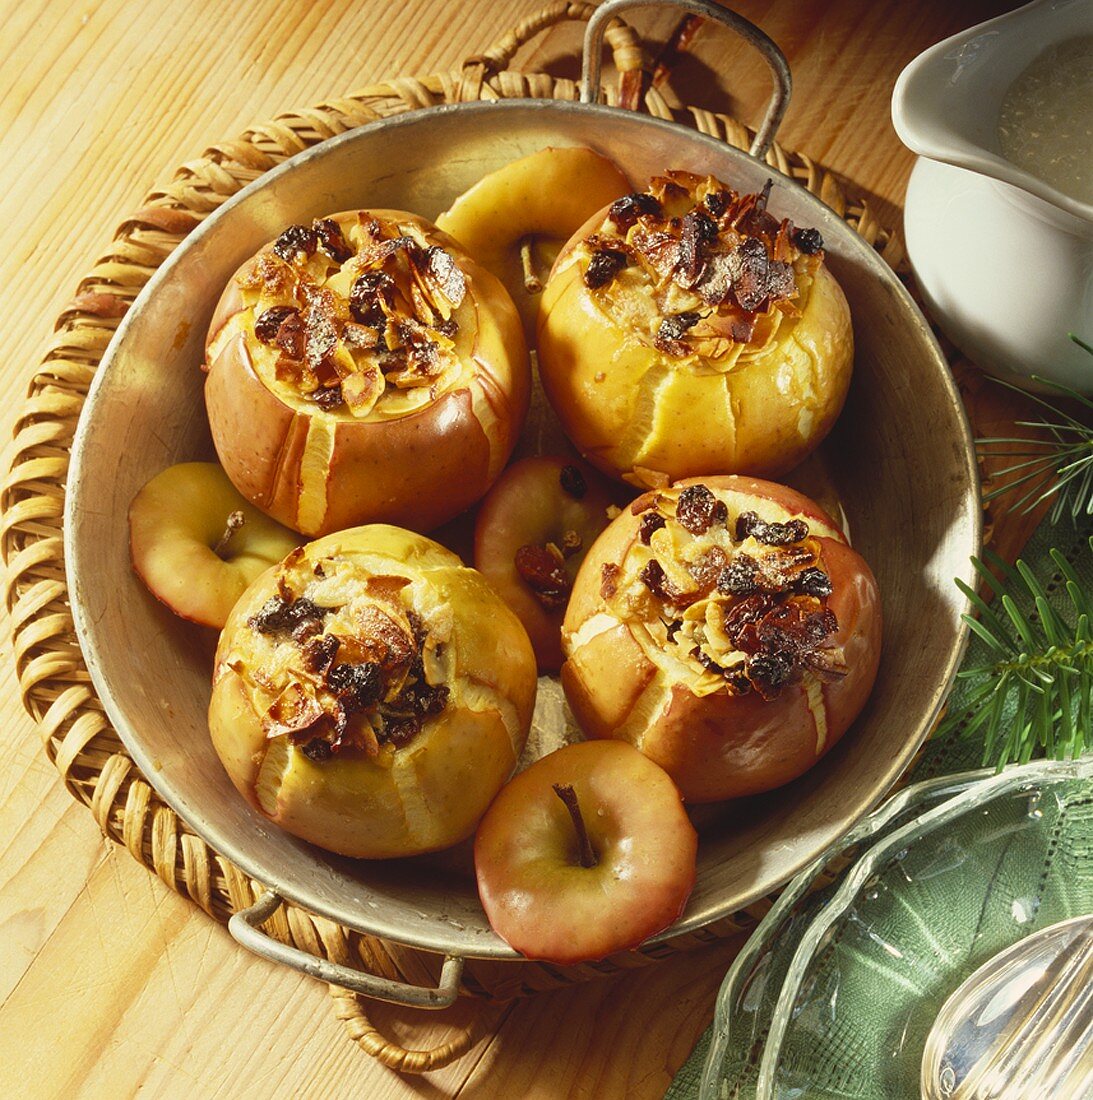 Four baked apples with raisin and almond stuffing